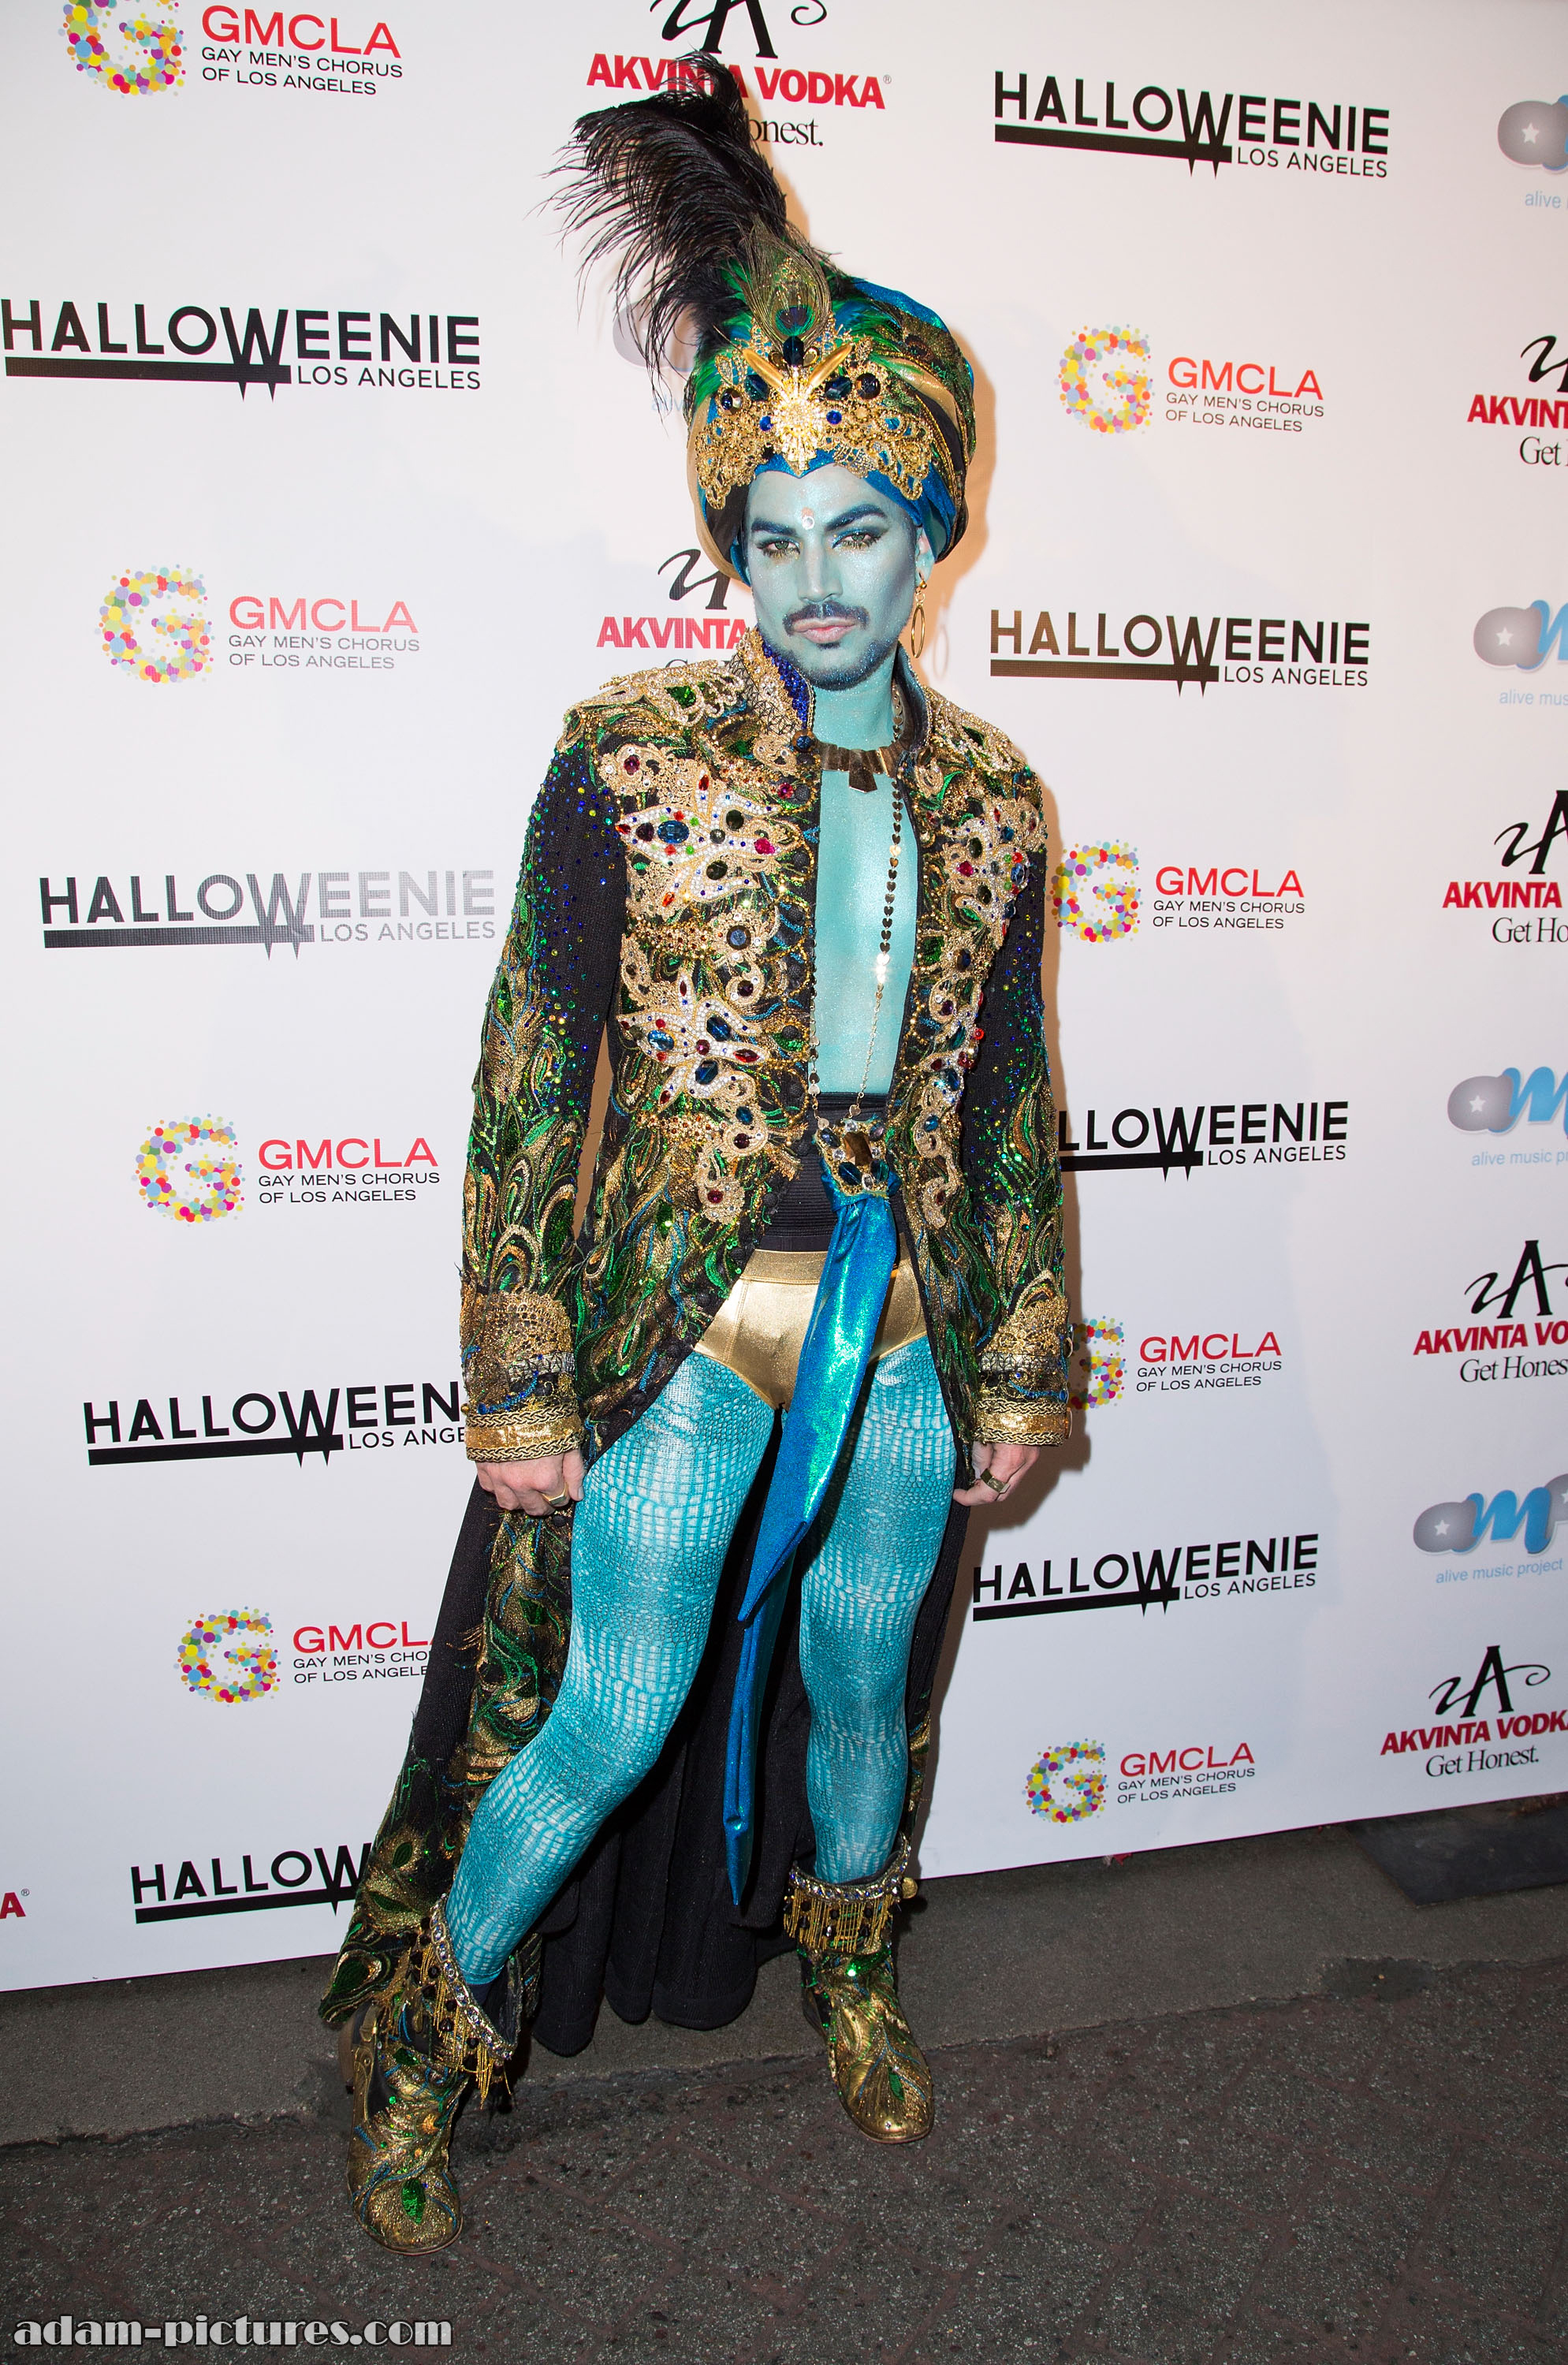 The Best Celebrity Halloween Costumes Through The Years